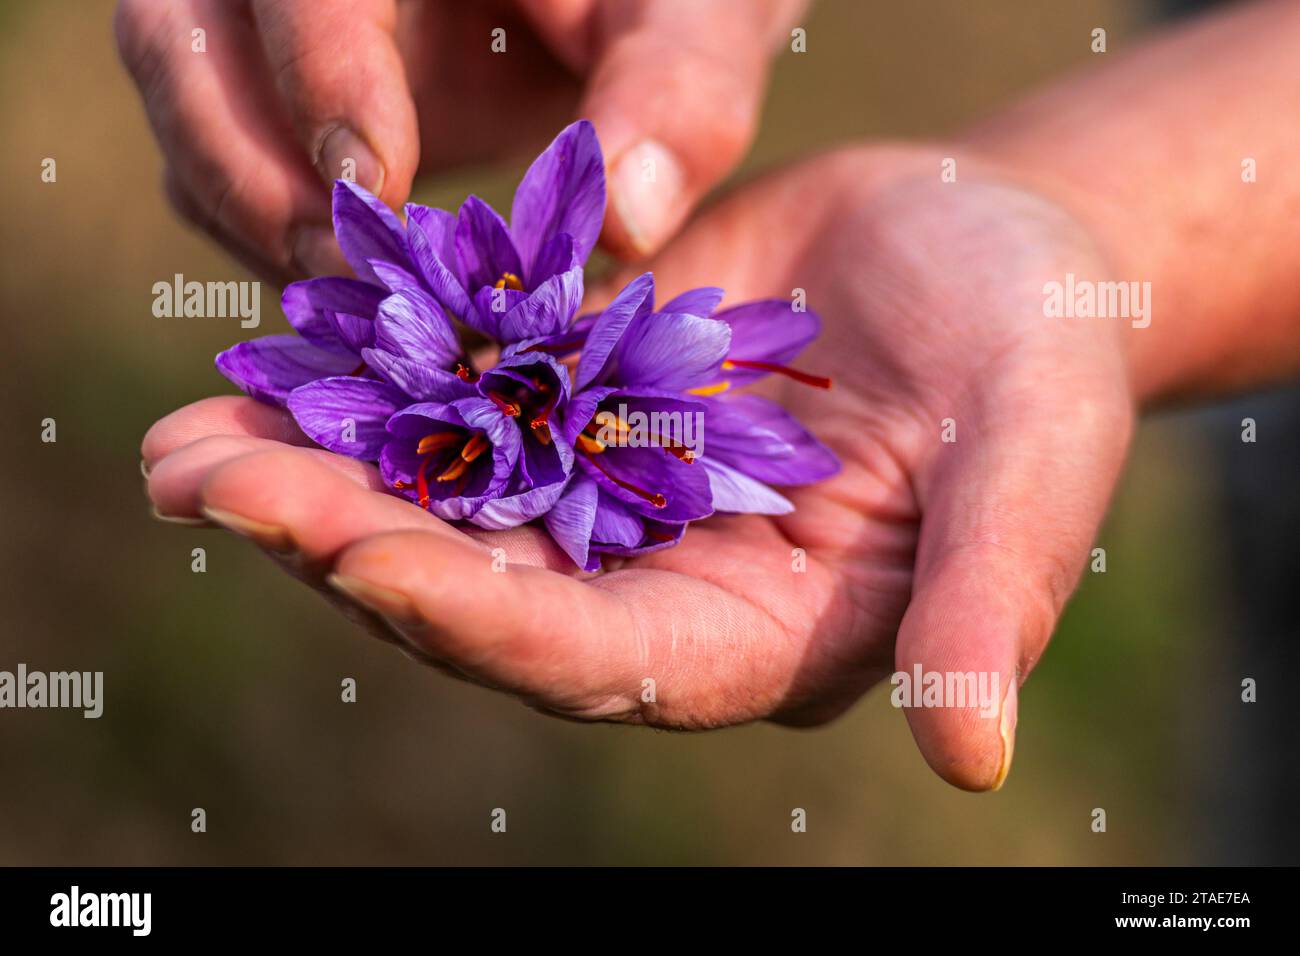 France, Somme (80), Saint-Riquier, Saffron harvest at Fabrice Houdant's Safran du Scardon in Saint-Riquier. Fabrice started growing saffron, the most expensive spice in the world (€40 a gram), two years ago. He planted 50,000 bulbs in August and is now harvesting the flowers.Explanation of pruning, which consists of keeping only the red pistils that make up the much sought-after spice. In love with his product, Fabrice never ceases to praise its beauty and taste, and savours the pleasure of breathing in the scent of fresh saffron. Stock Photo